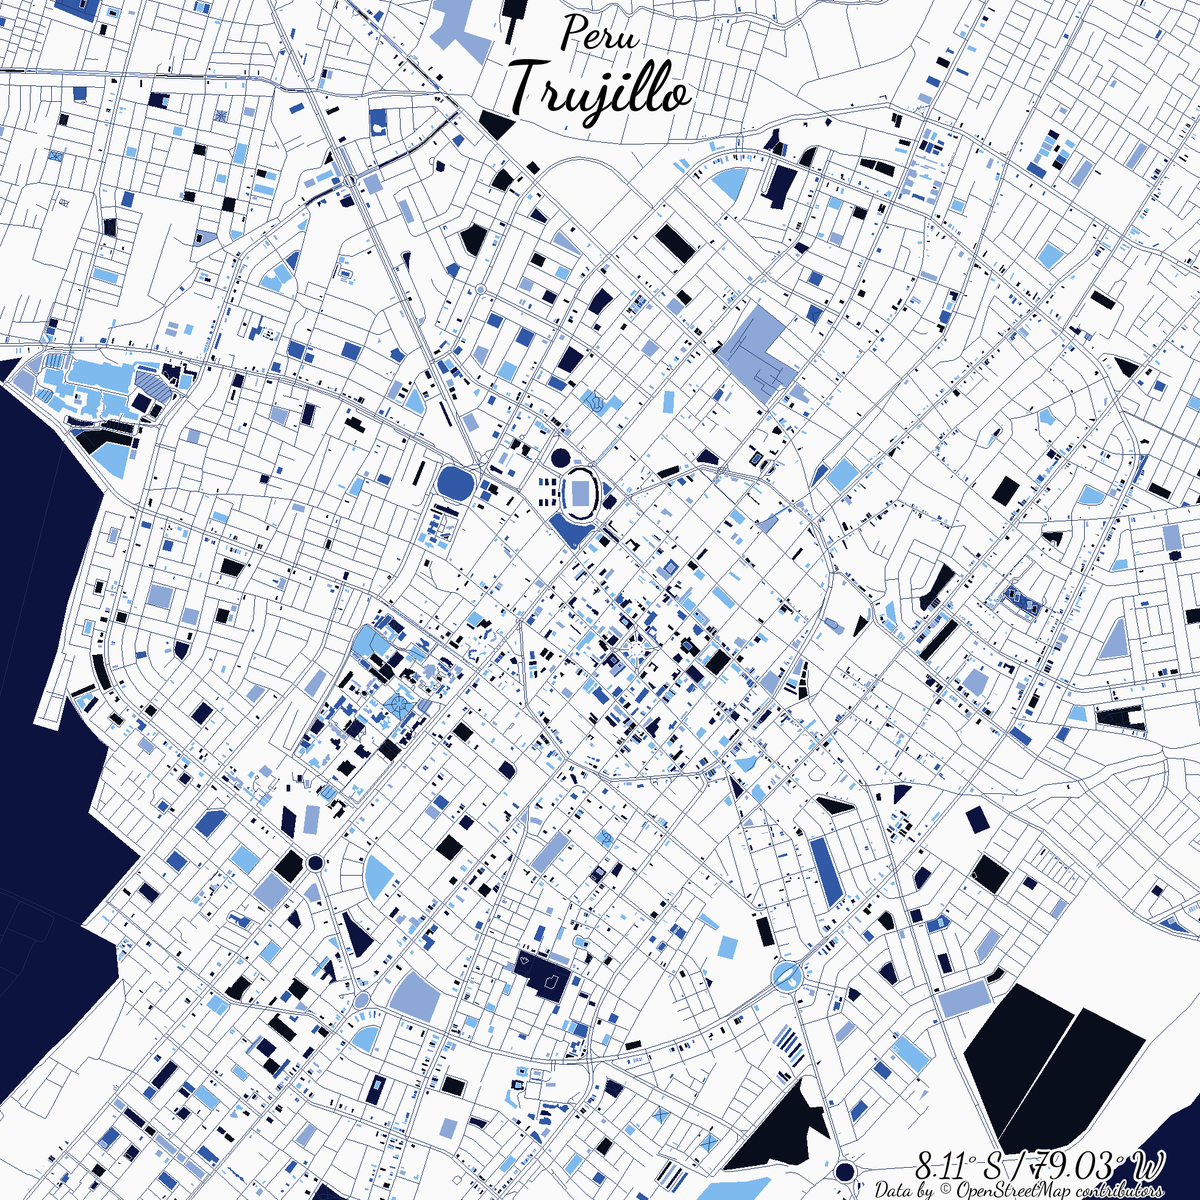 Image of Trujillo, Peru created in #rstats using data from #OpenStreetMap. https://t.co/usXmD4qK1n